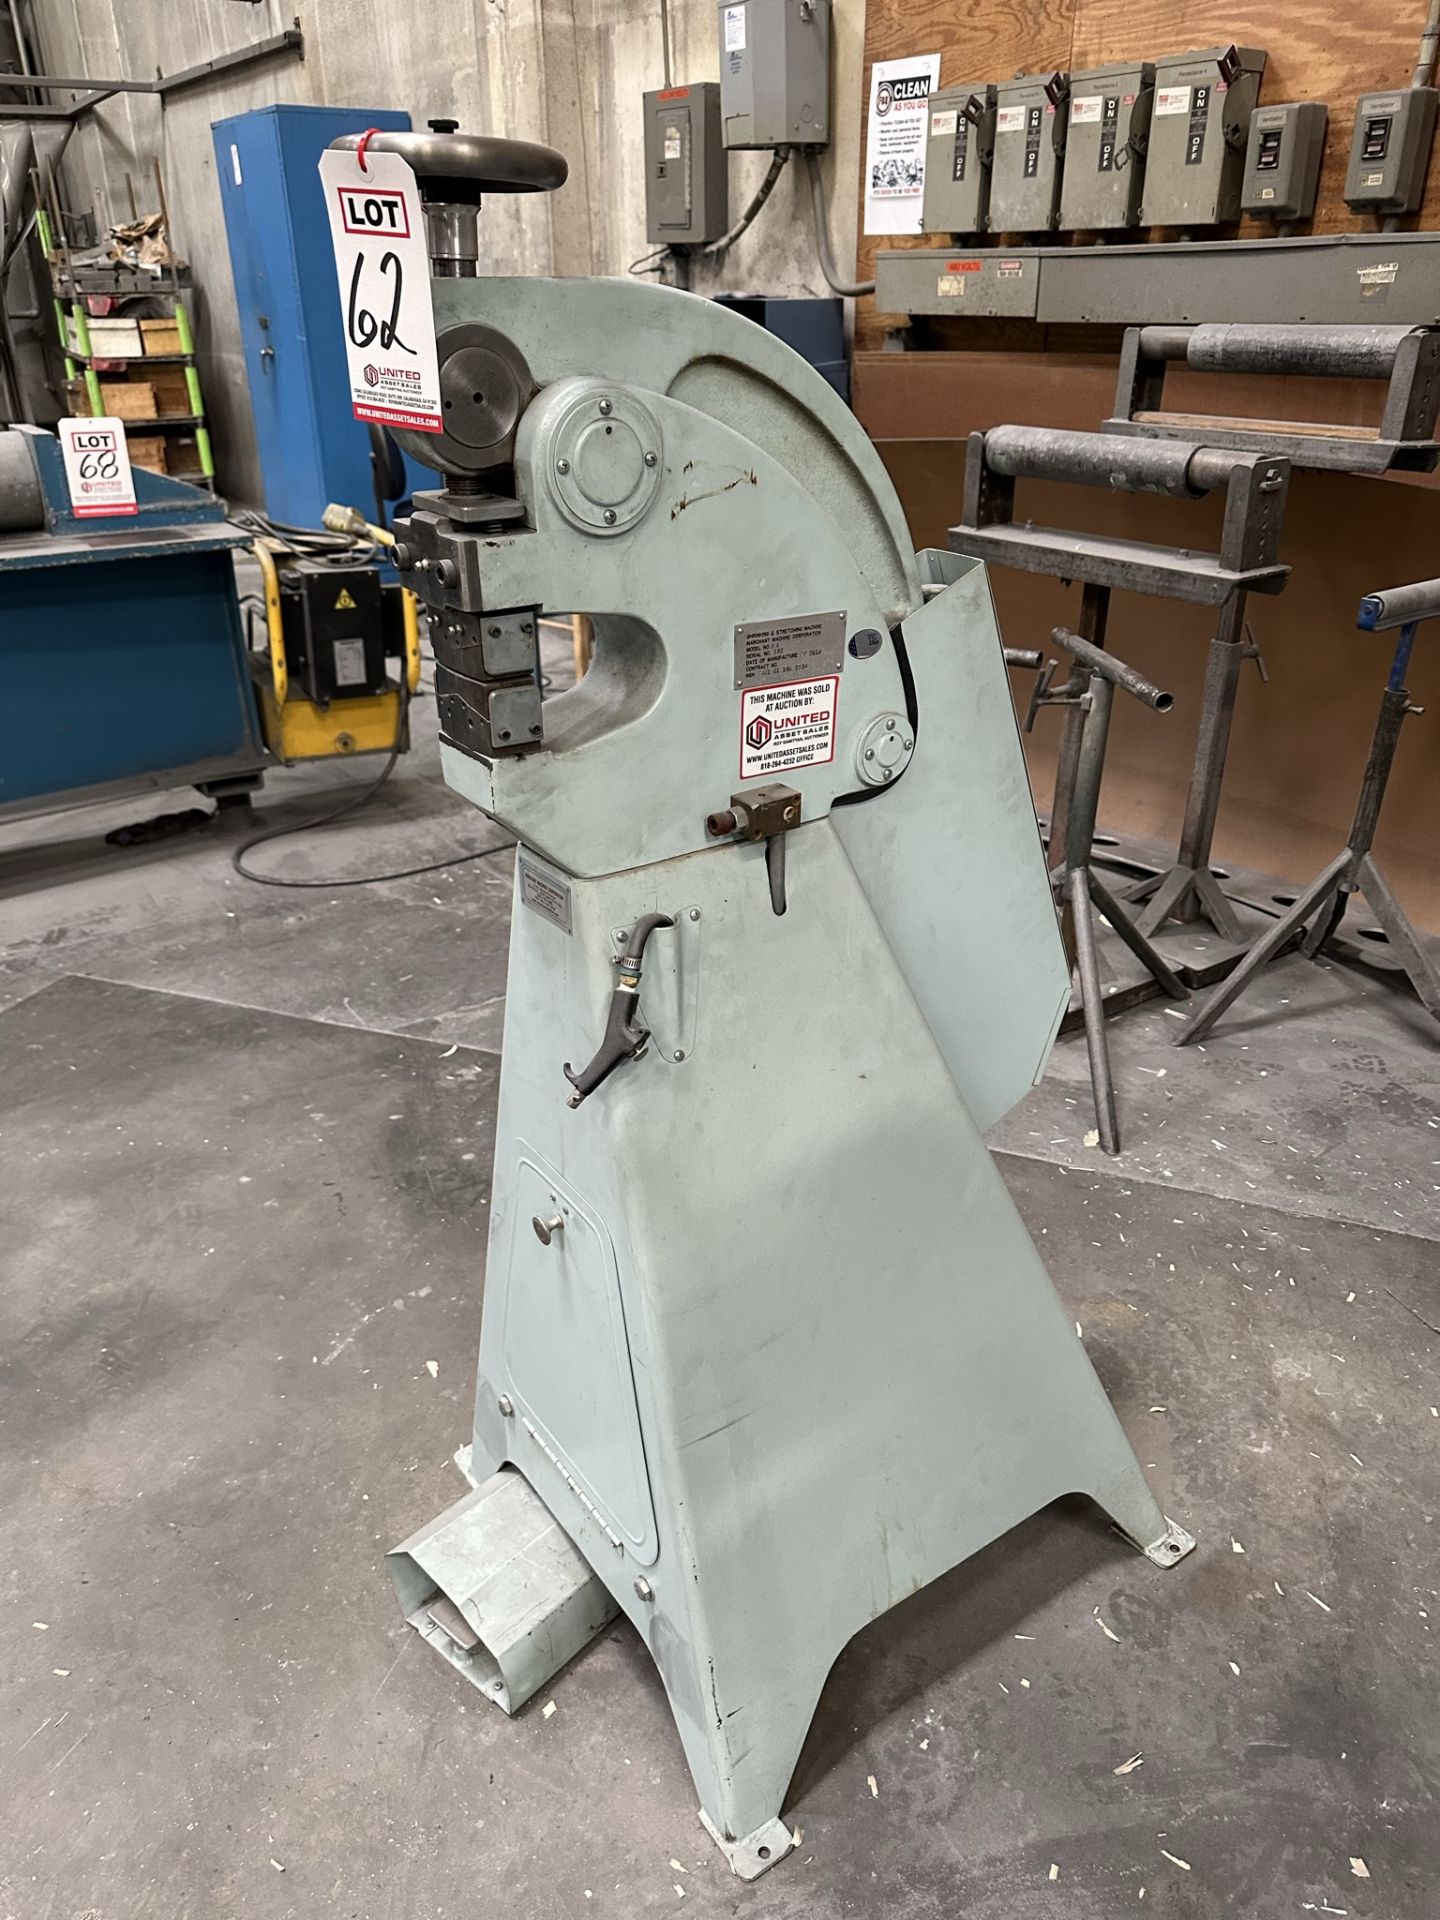 2019 MARCHANT MACHINE CORP SHRINKING AND STRETCHING MACHINE, MODEL 6A, S/N 382 - Image 2 of 4